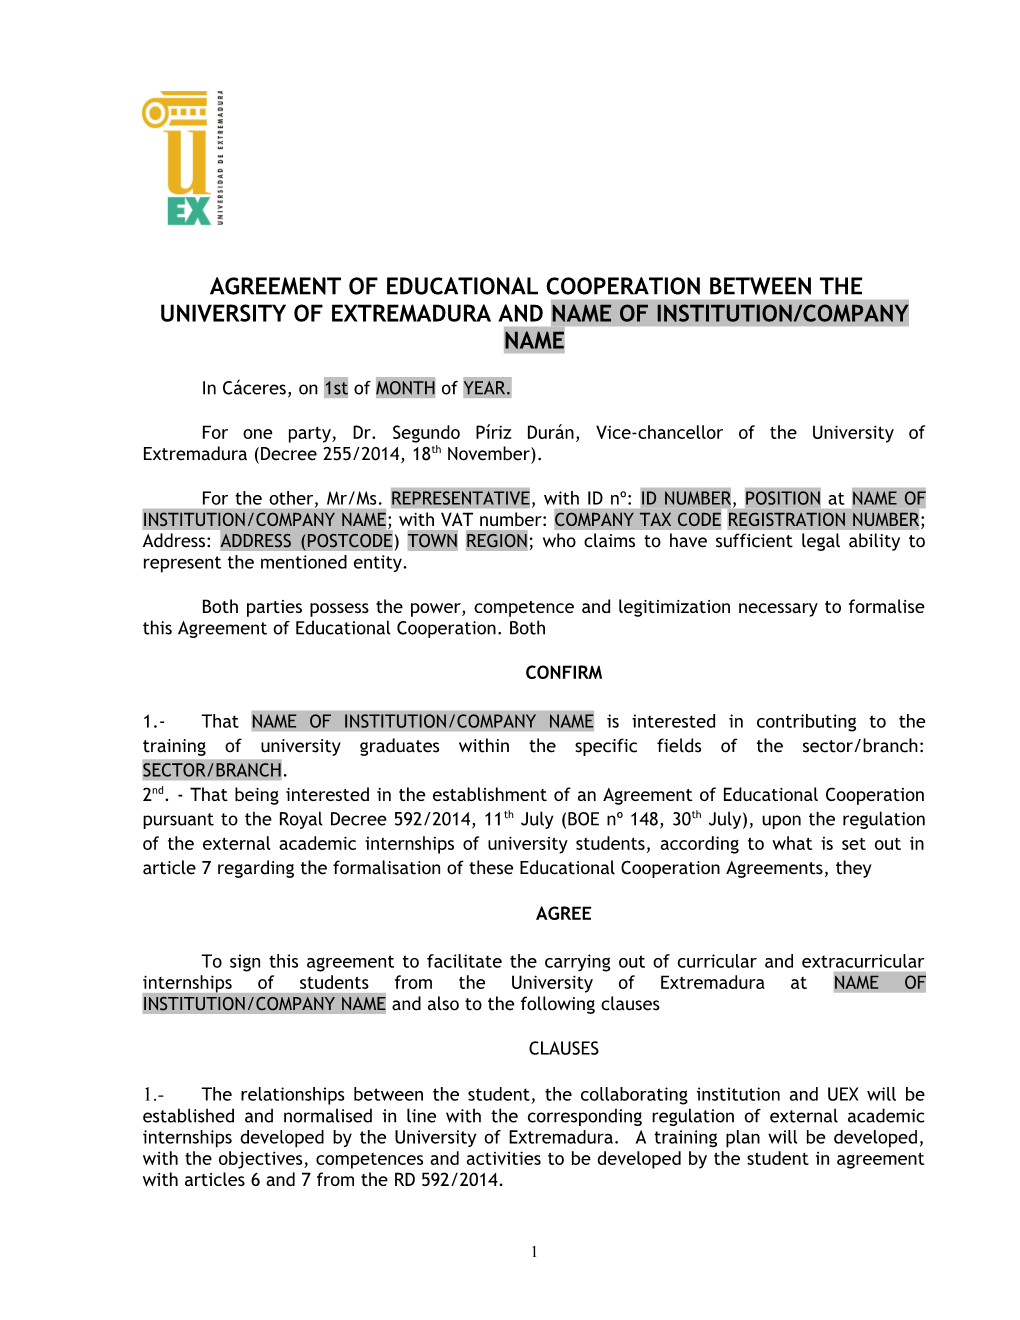 Agreement of Educational Cooperation Between the University of Extremadura and Name Of